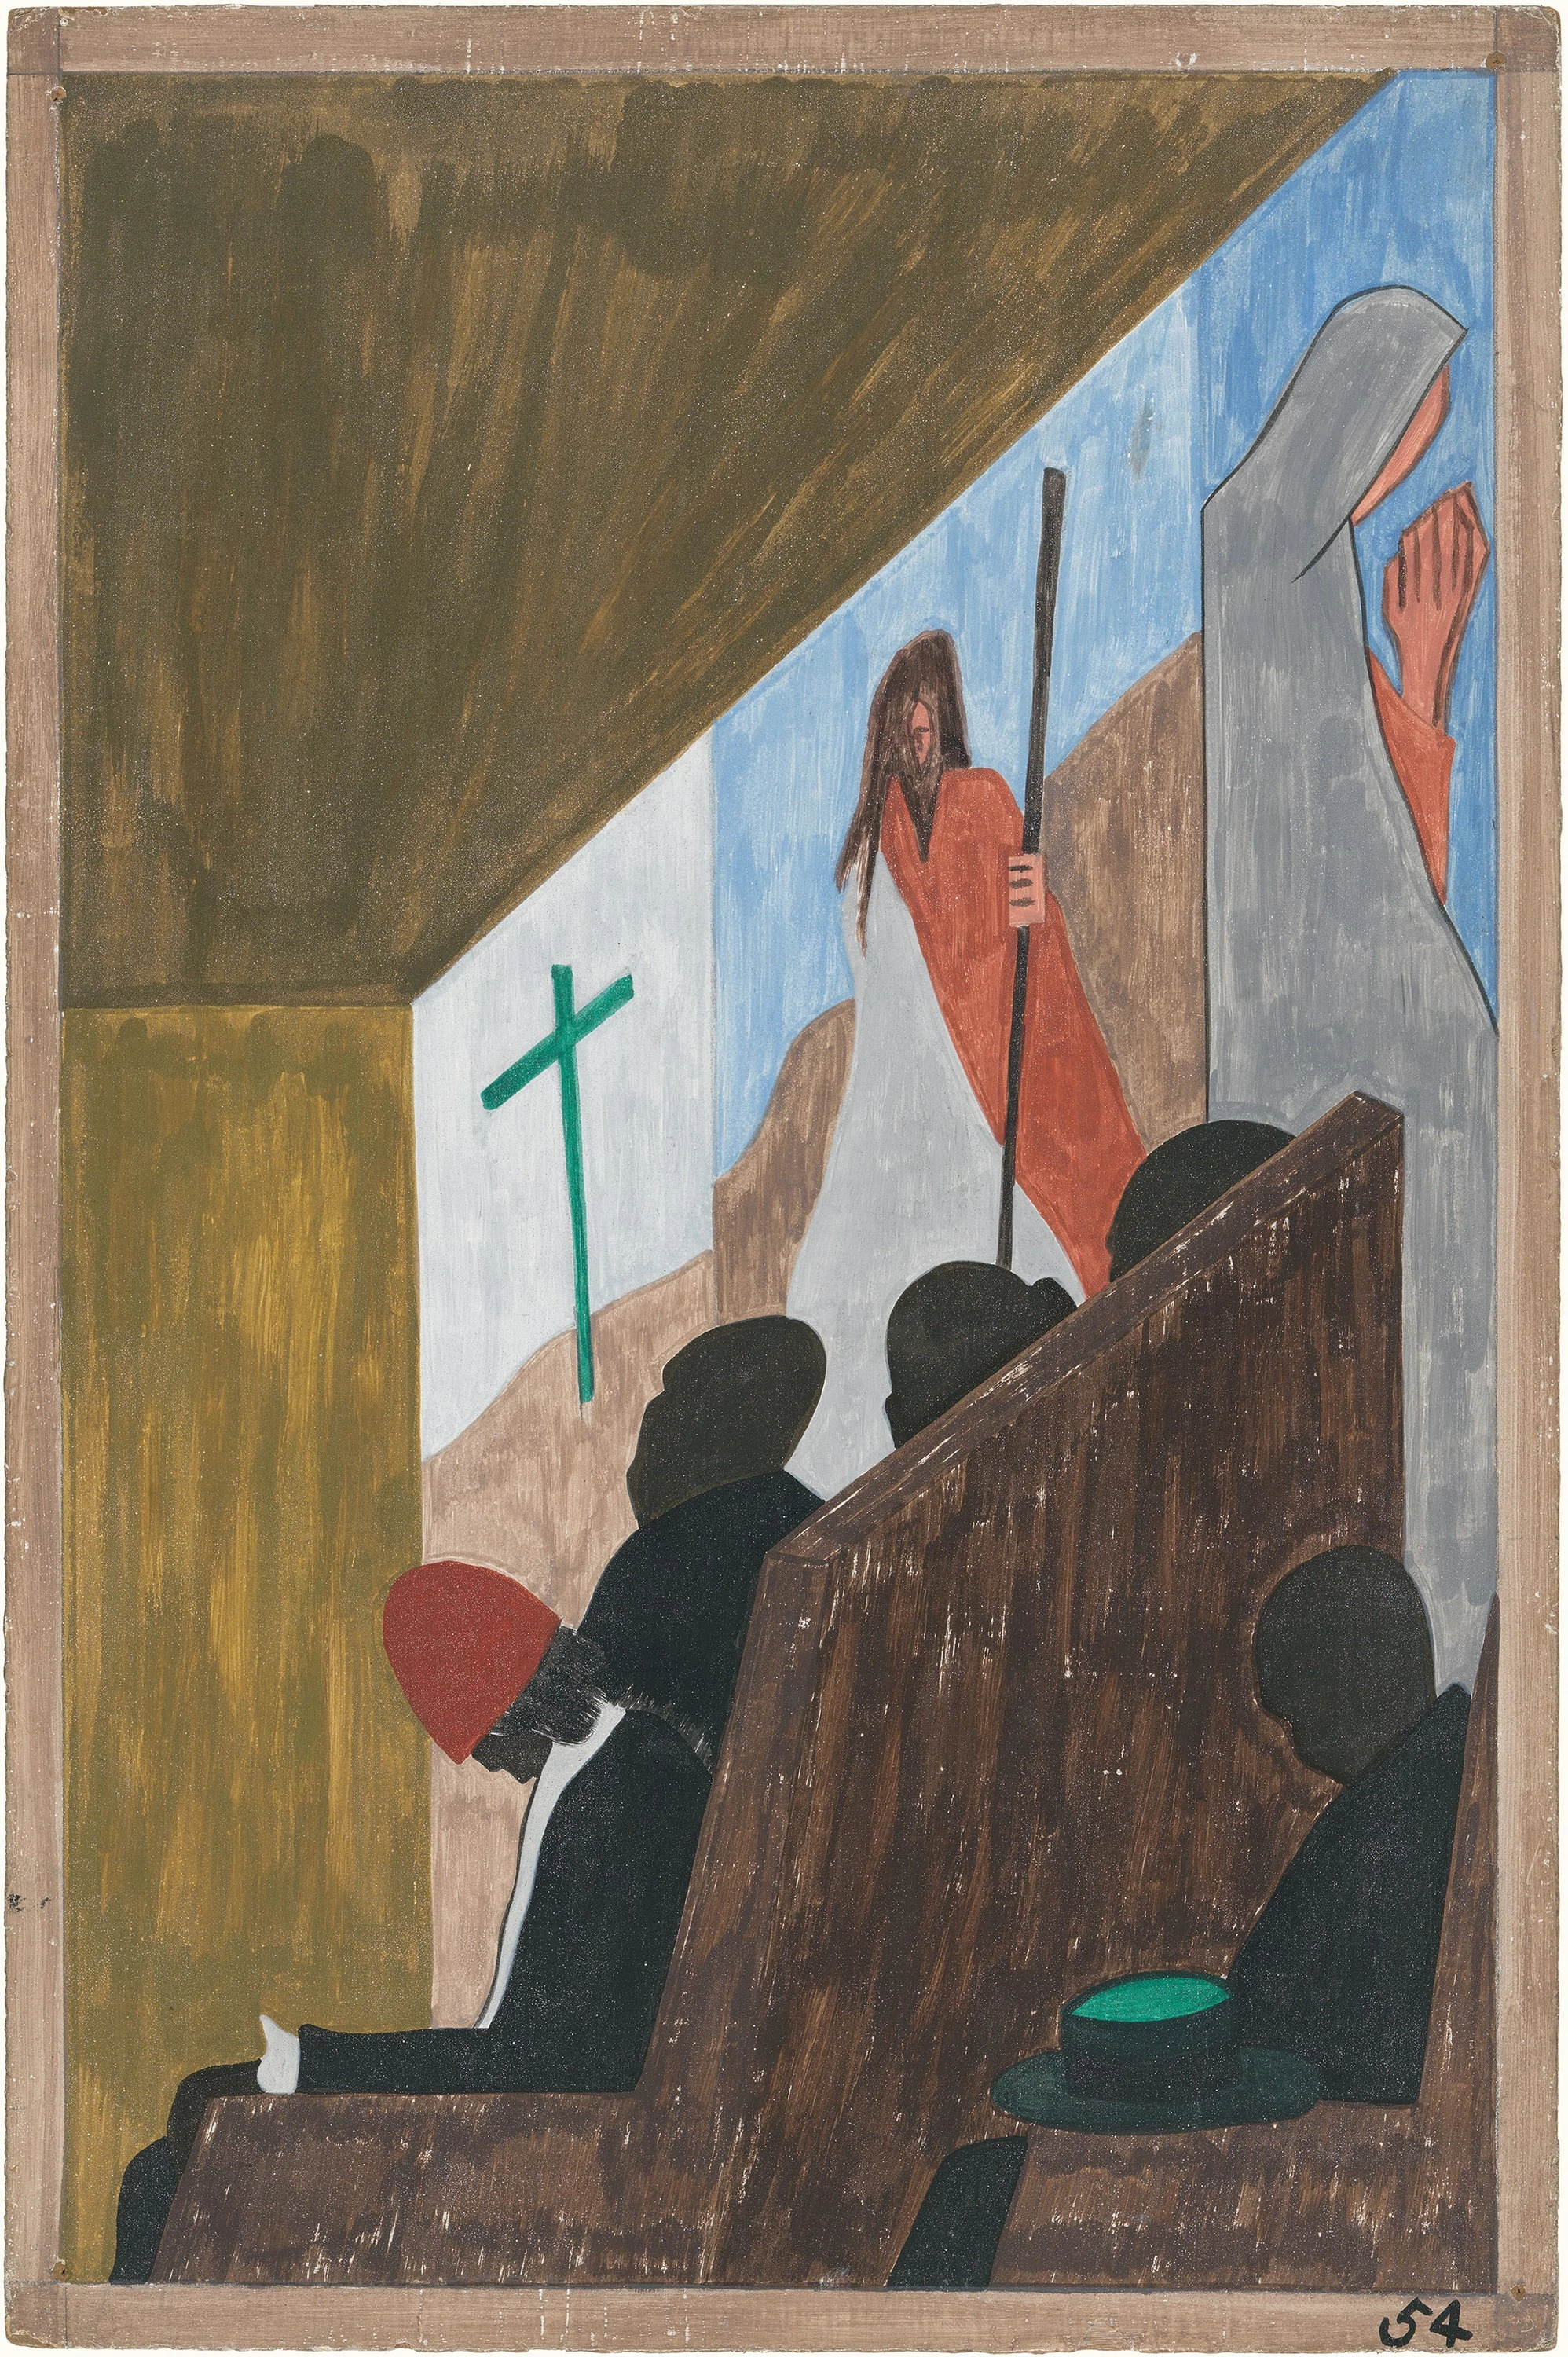 Migration Series No.54: For the migrants, the church was the center of life, Jacob Lawrence